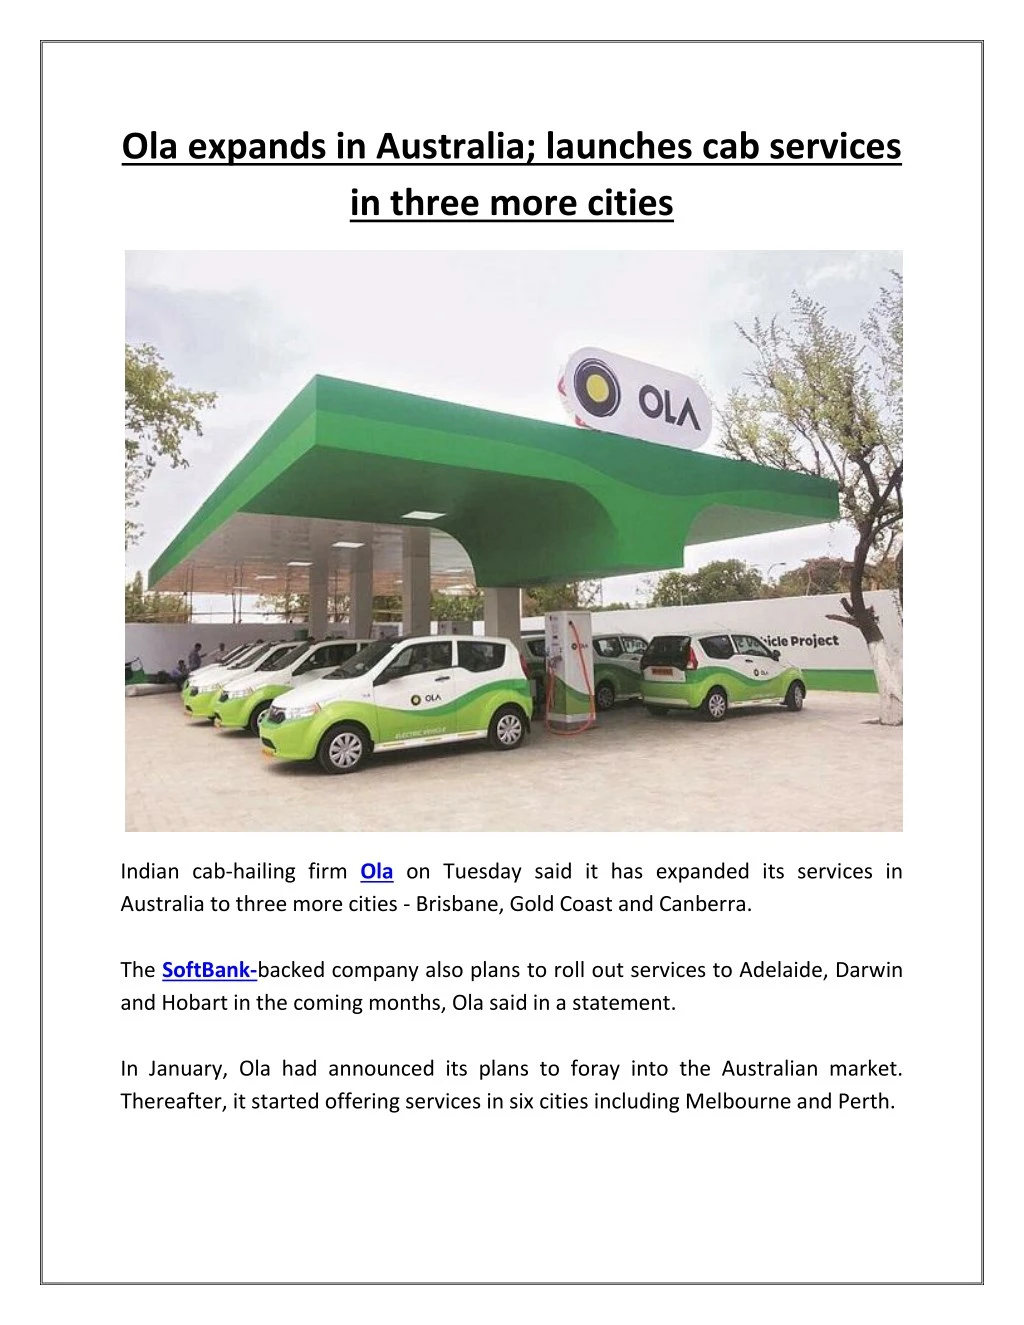 ola expands in australia launches cab services